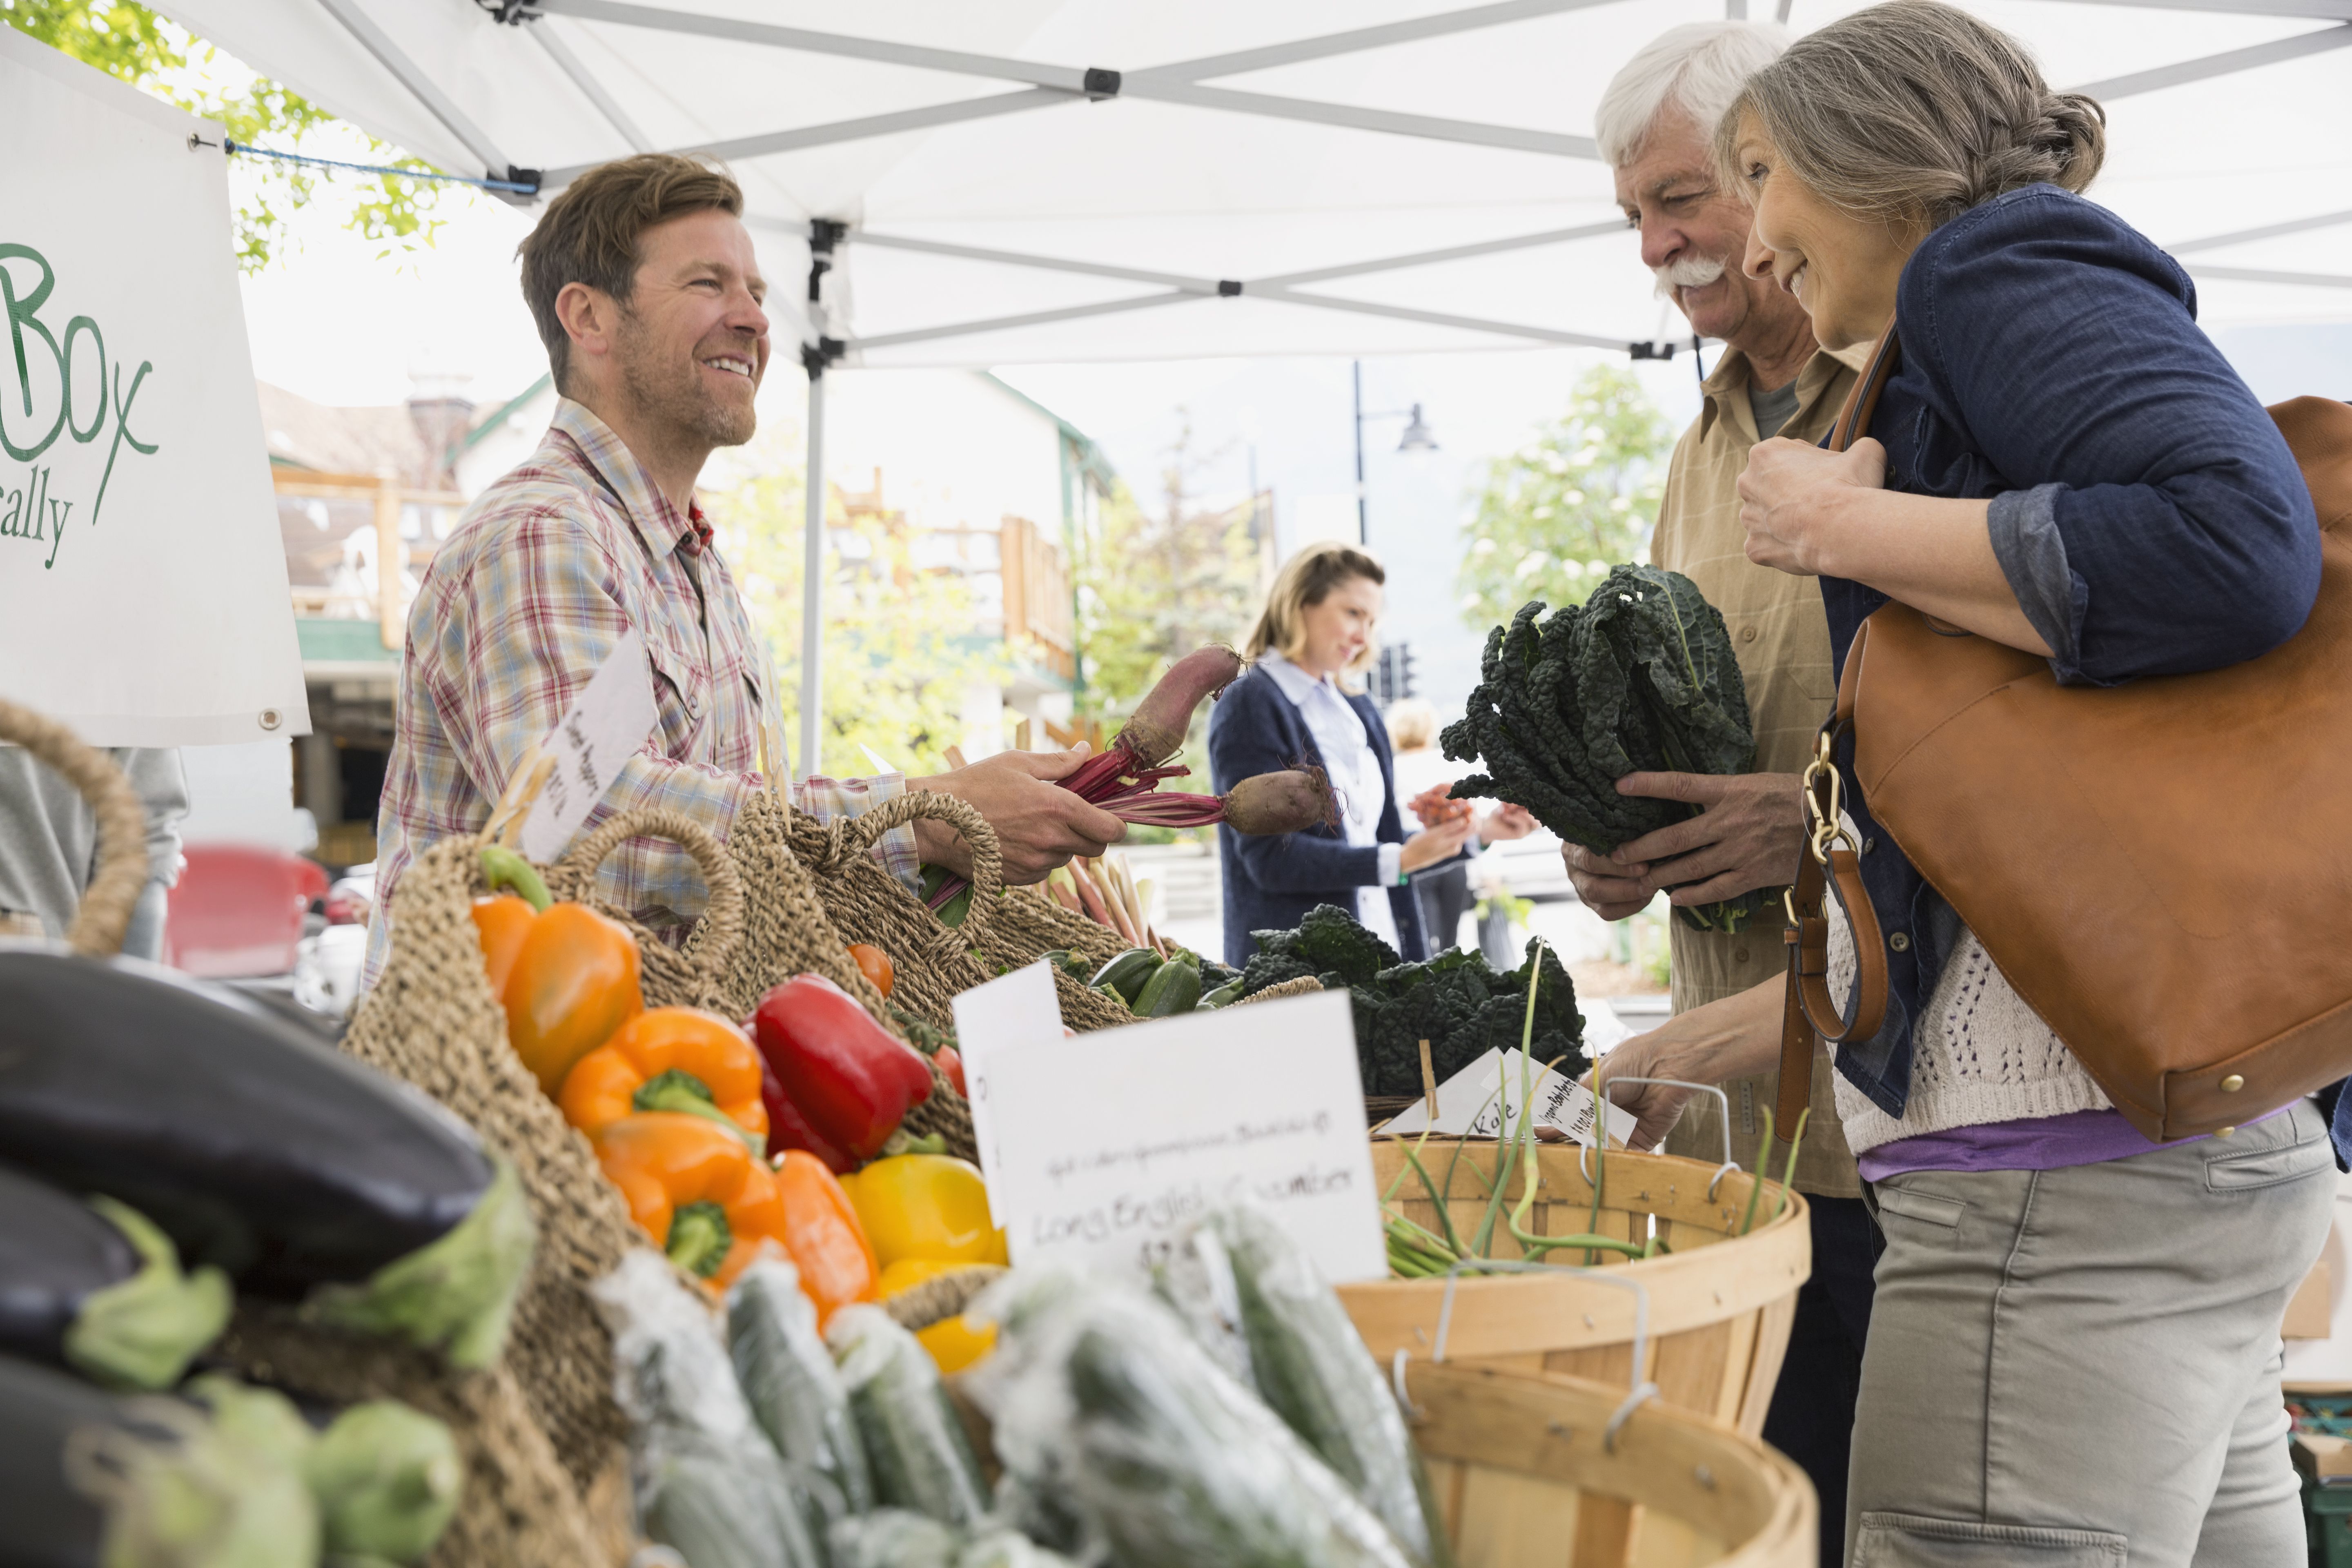 How To Make A Small Farmers Market